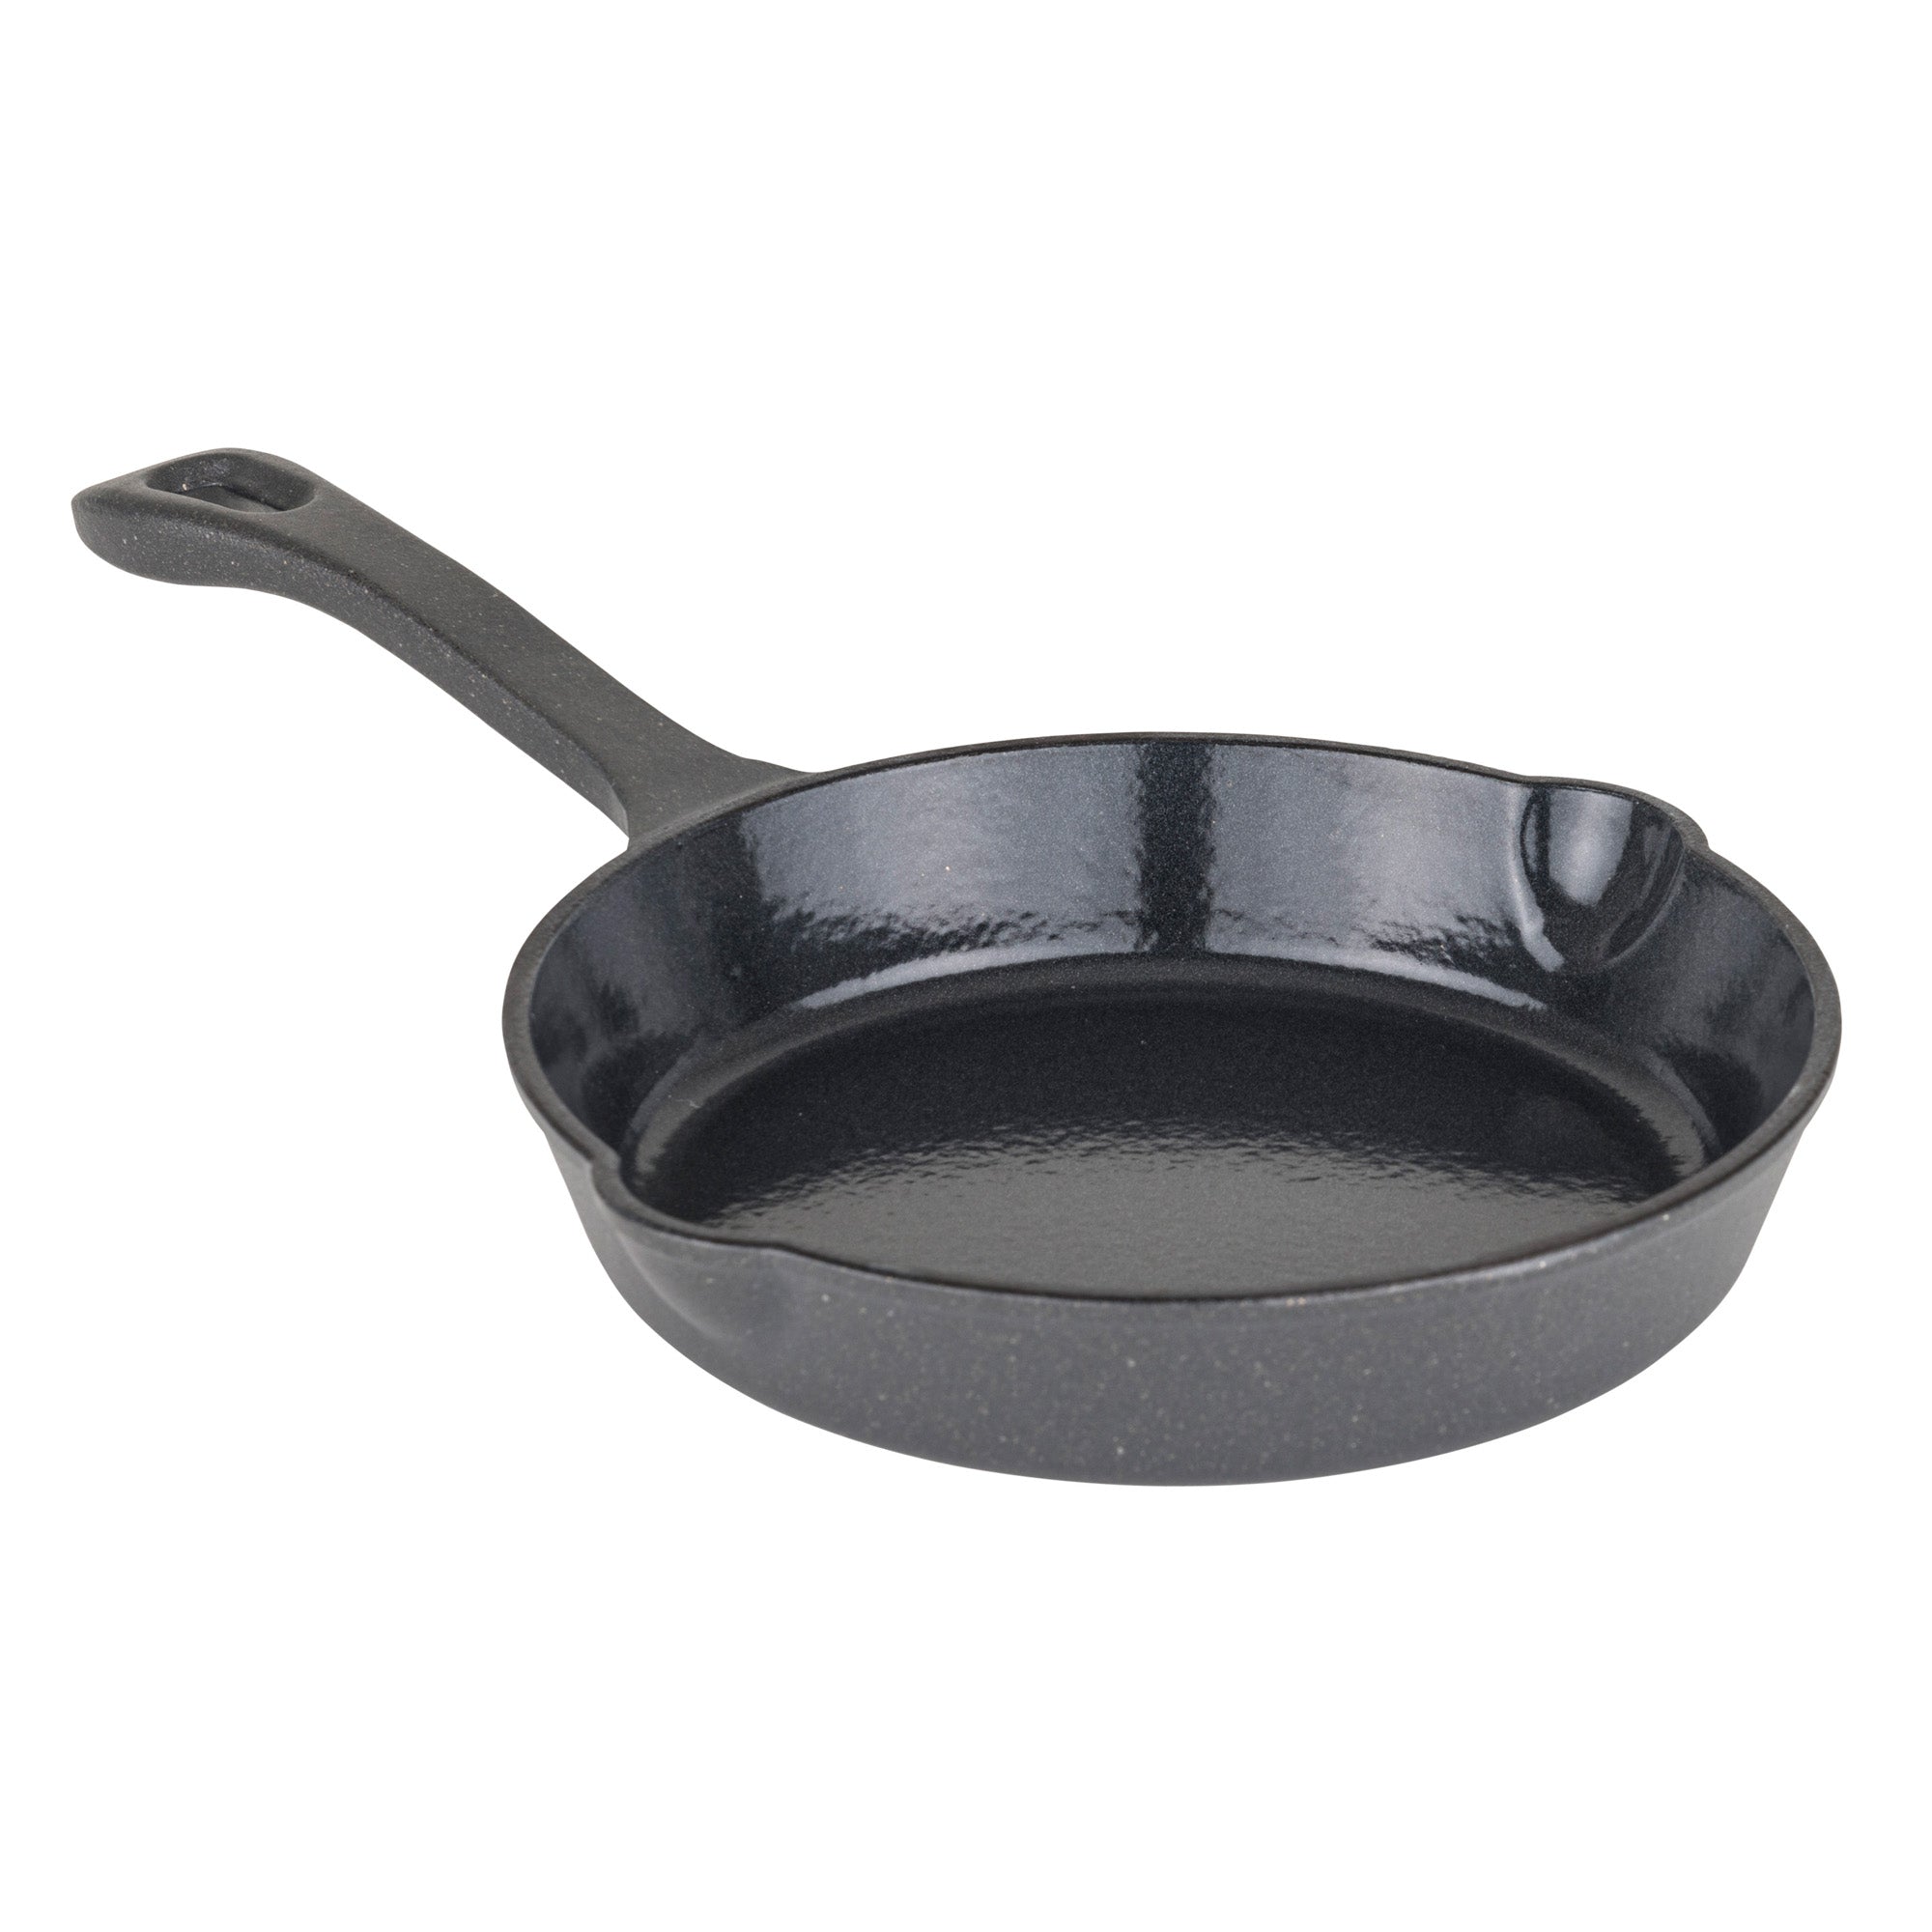 How to Pick the Best Enameled Cast-Iron Skillets 